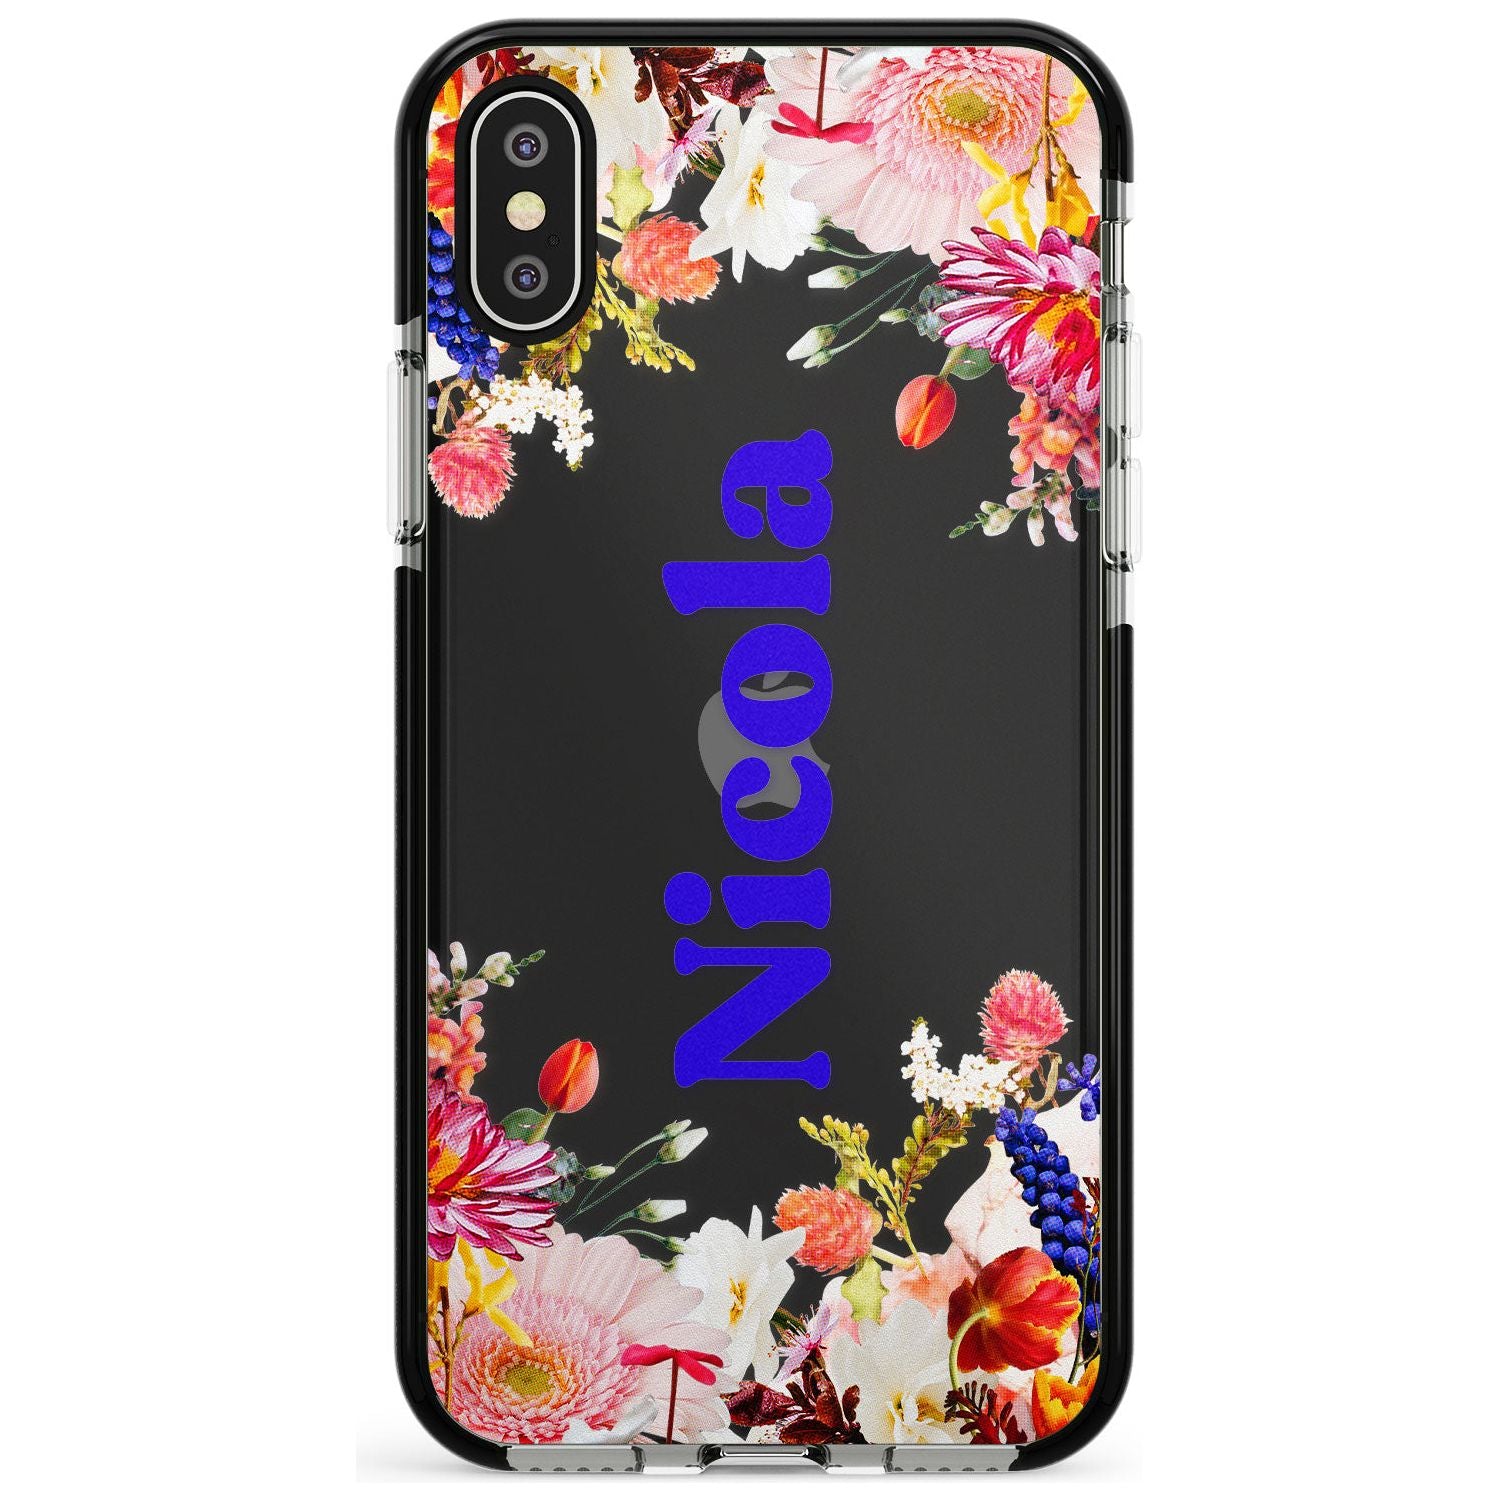 Custom Text with Floral Borders Pink Fade Impact Phone Case for iPhone X XS Max XR